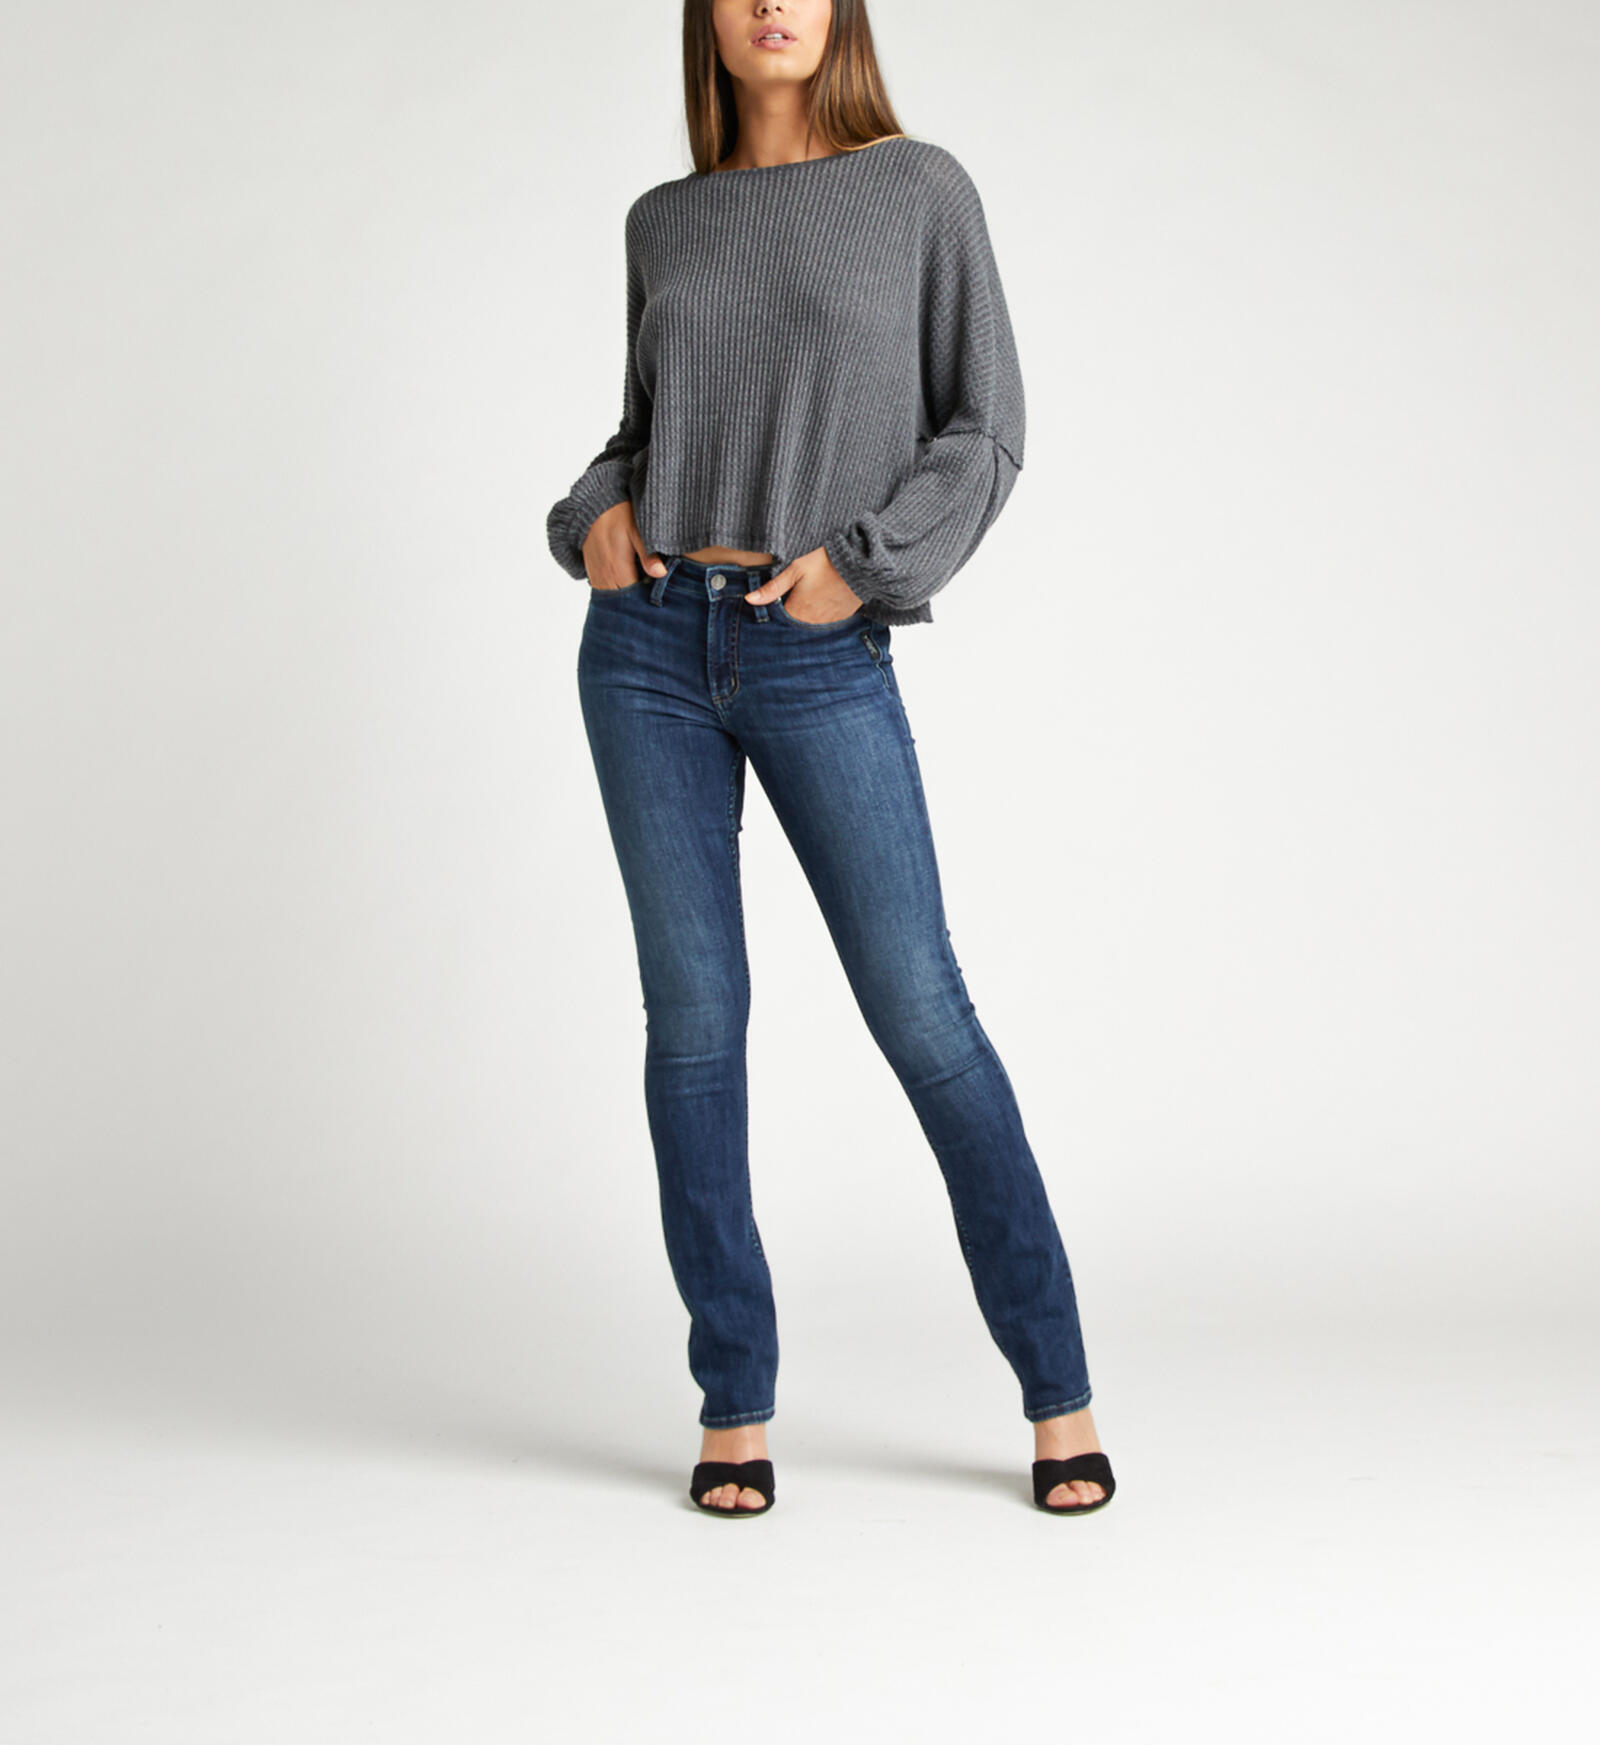 Women's Jeans  Bootcut, High-Rise, Skinny, and More